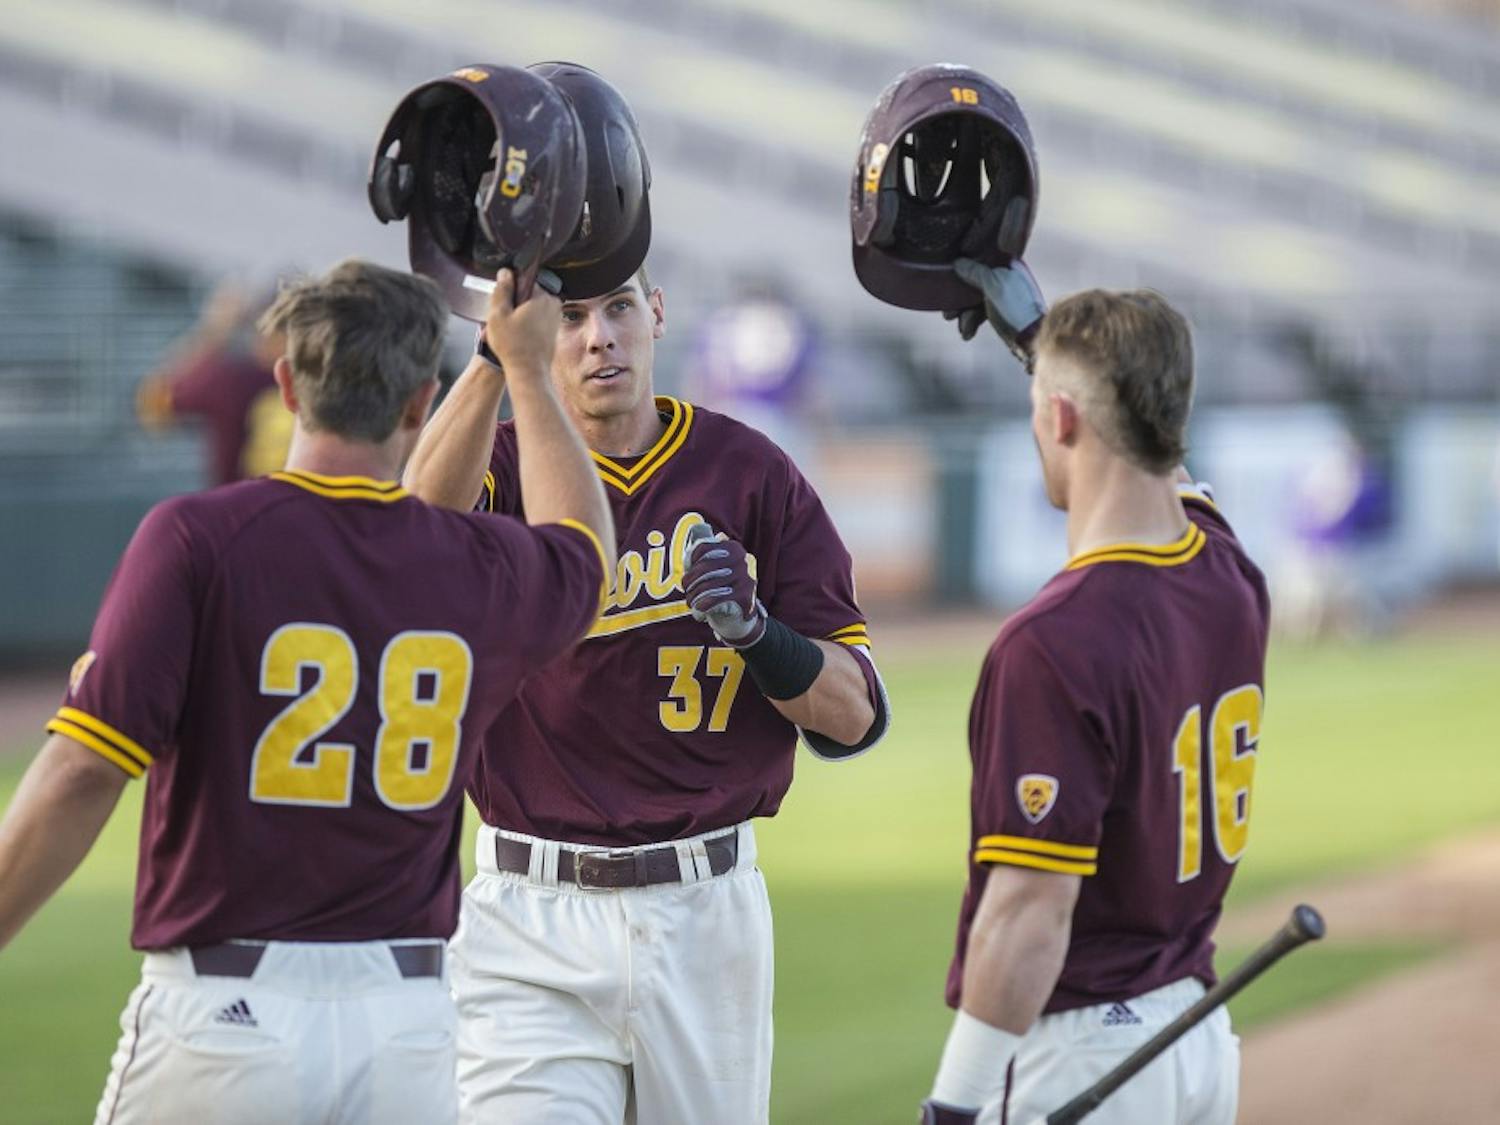 ASU shortstop Cody Woodmansee, center, celebrates with teammates after hitting a home-run during a game against the University of Washington Huskies at Phoenix Municipal Stadium in Phoenix, Arizona, on Saturday, April 9, 2016. The Sun Devils won the game, 6-3. 